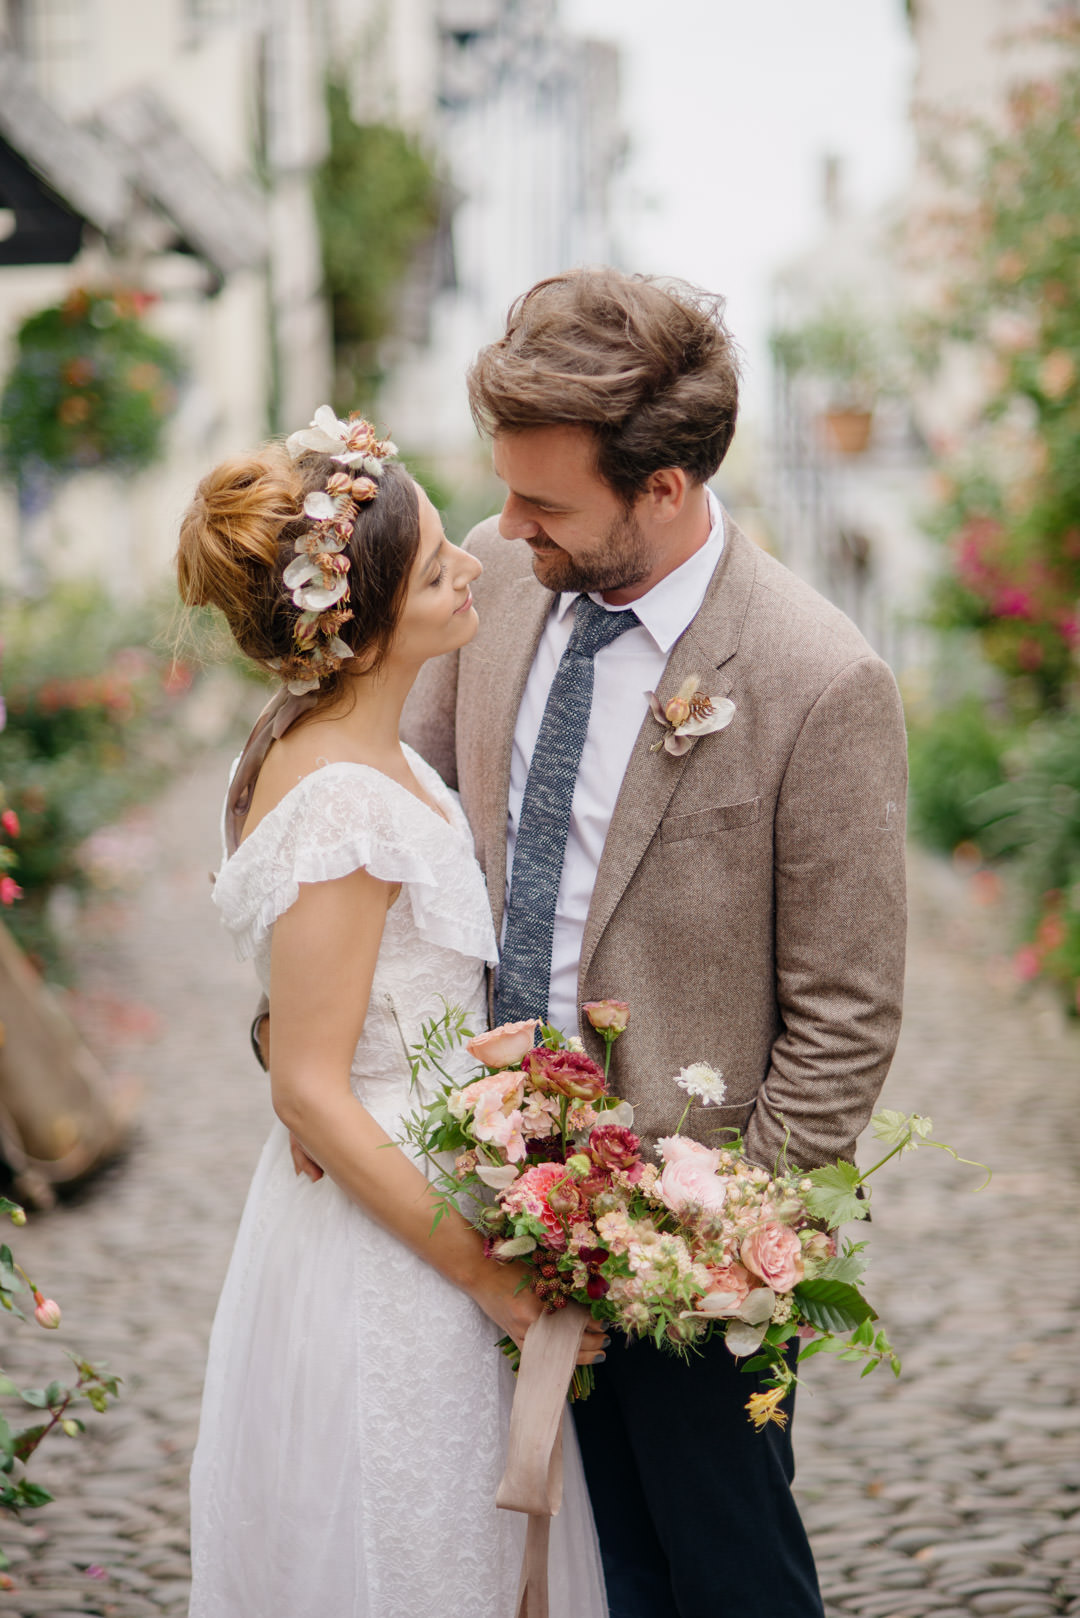 bride and groom stood in cobbled street holding flowers